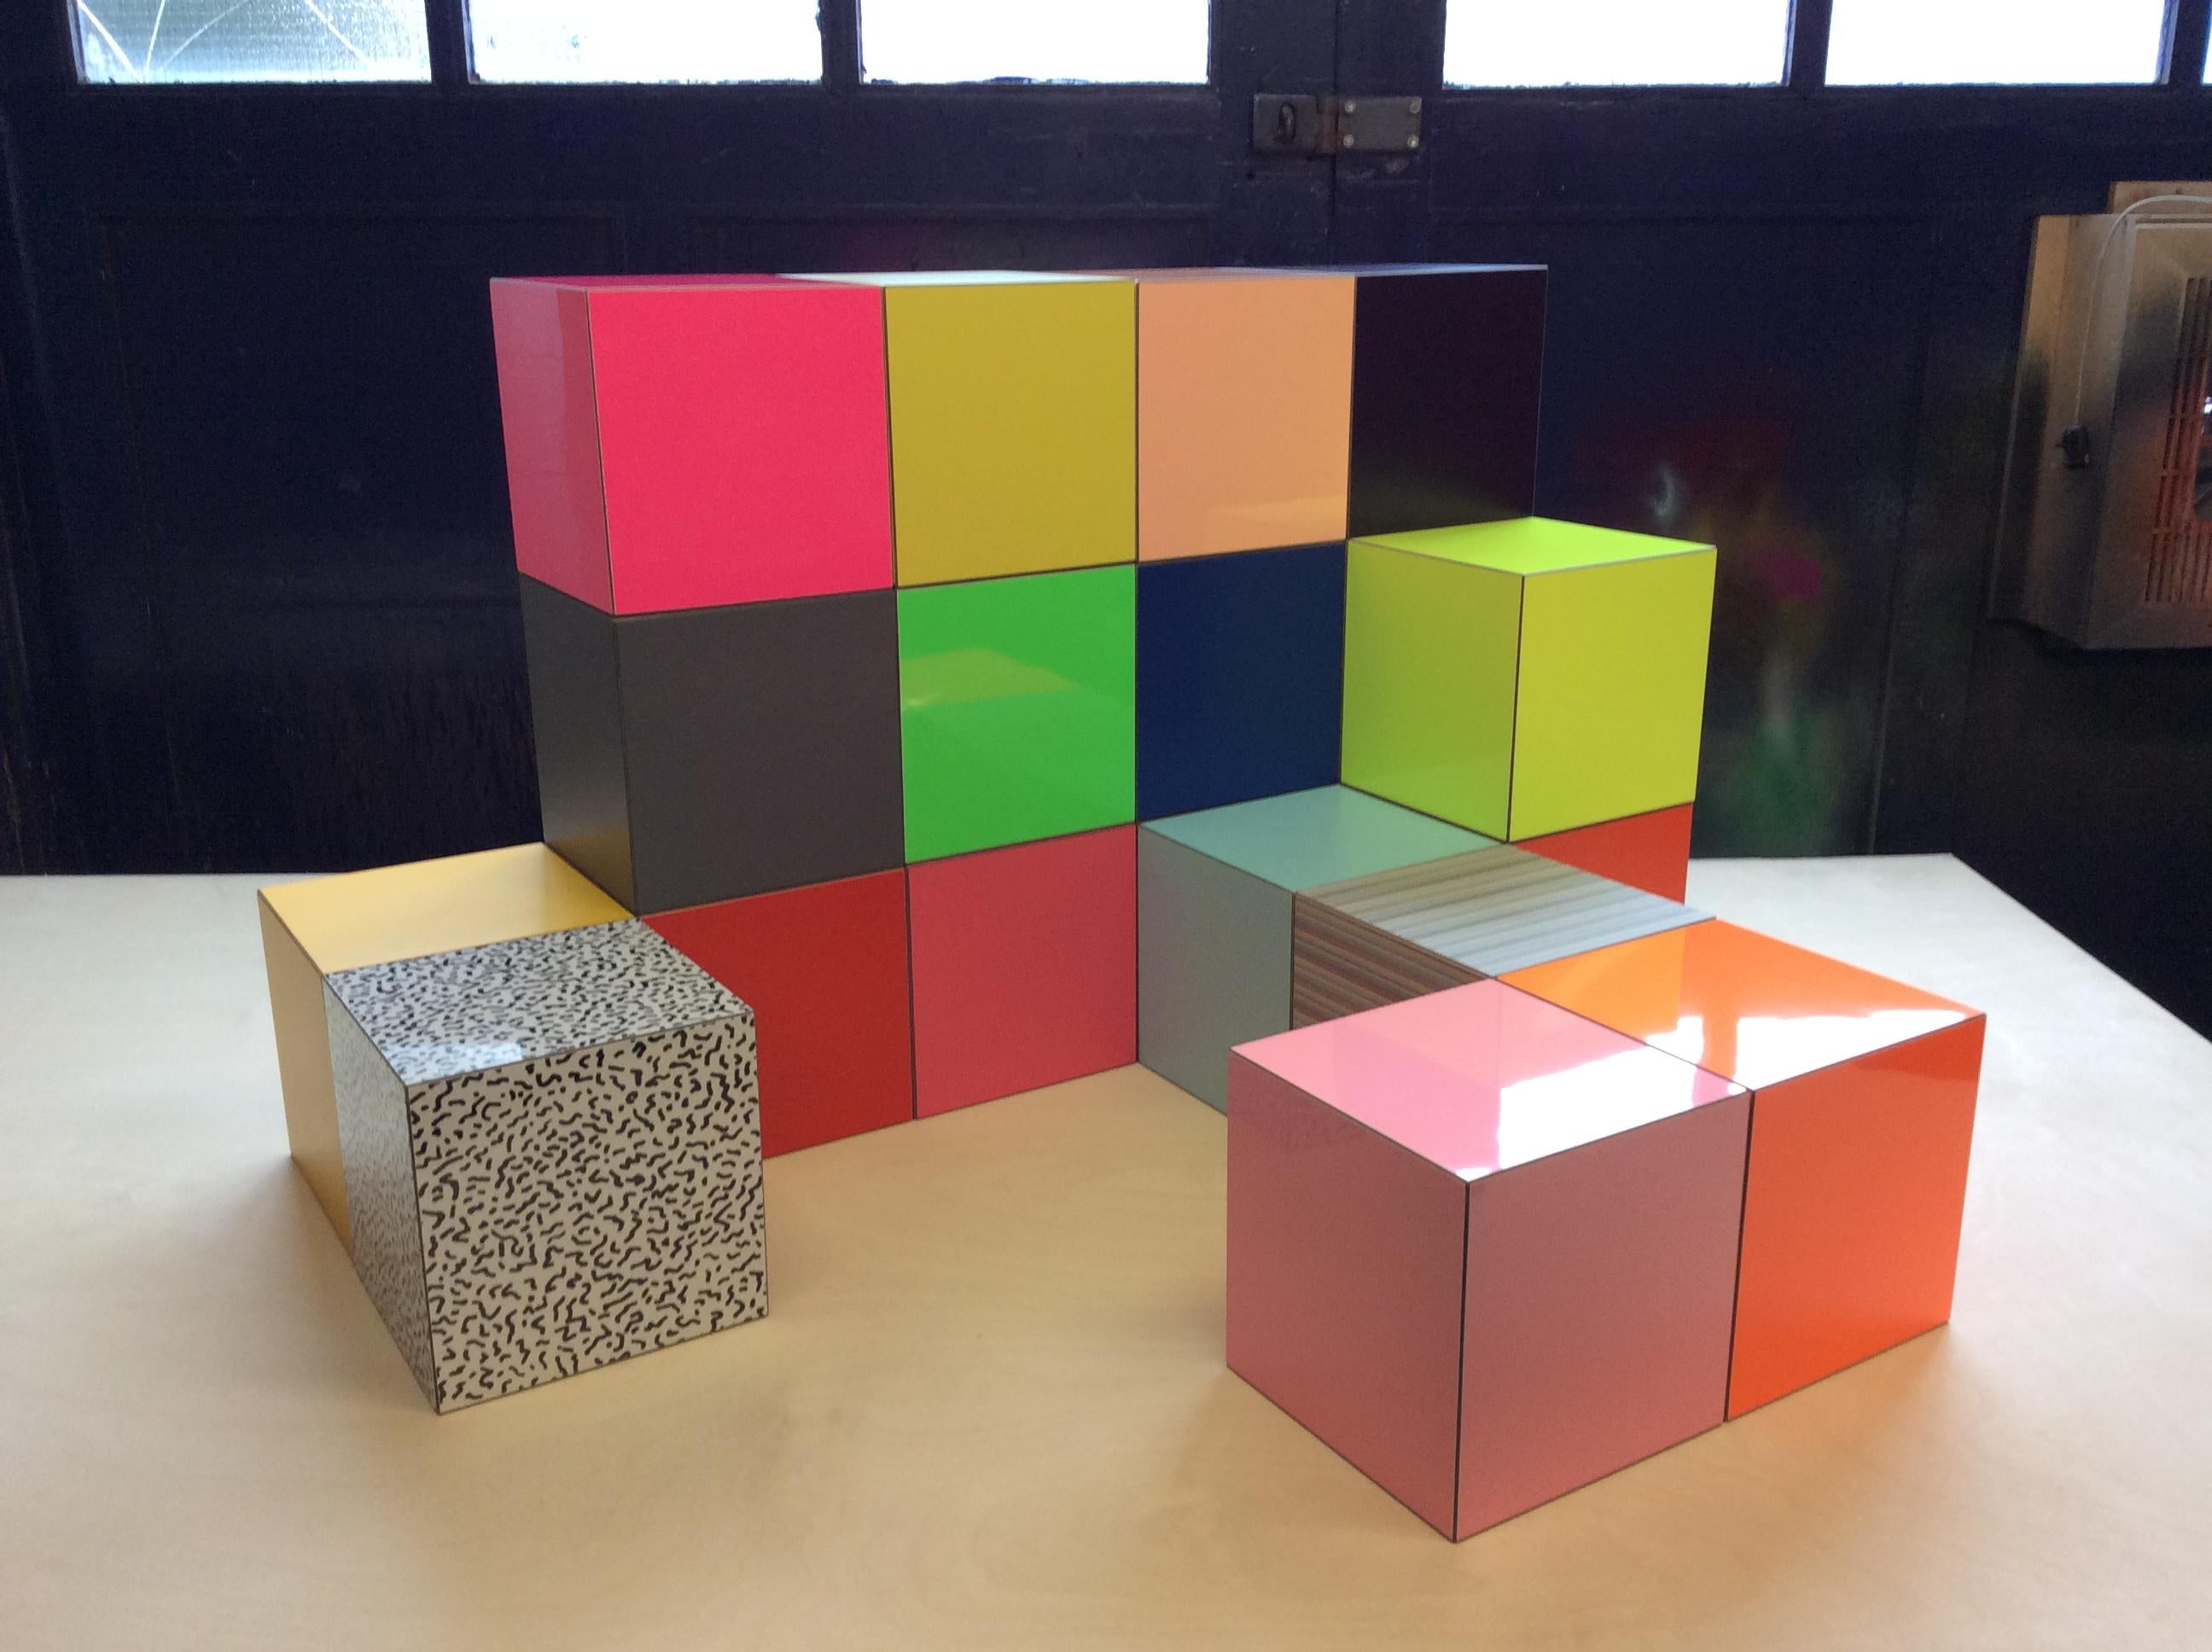 Following on from the success of my copper cubes of recent years I am pleased to start a new collaboration with Abet Laminati on this set of 20 magnetic coloured cubes.

Influenced by Sottsass and the mid 80's post-modern design movement these cubes